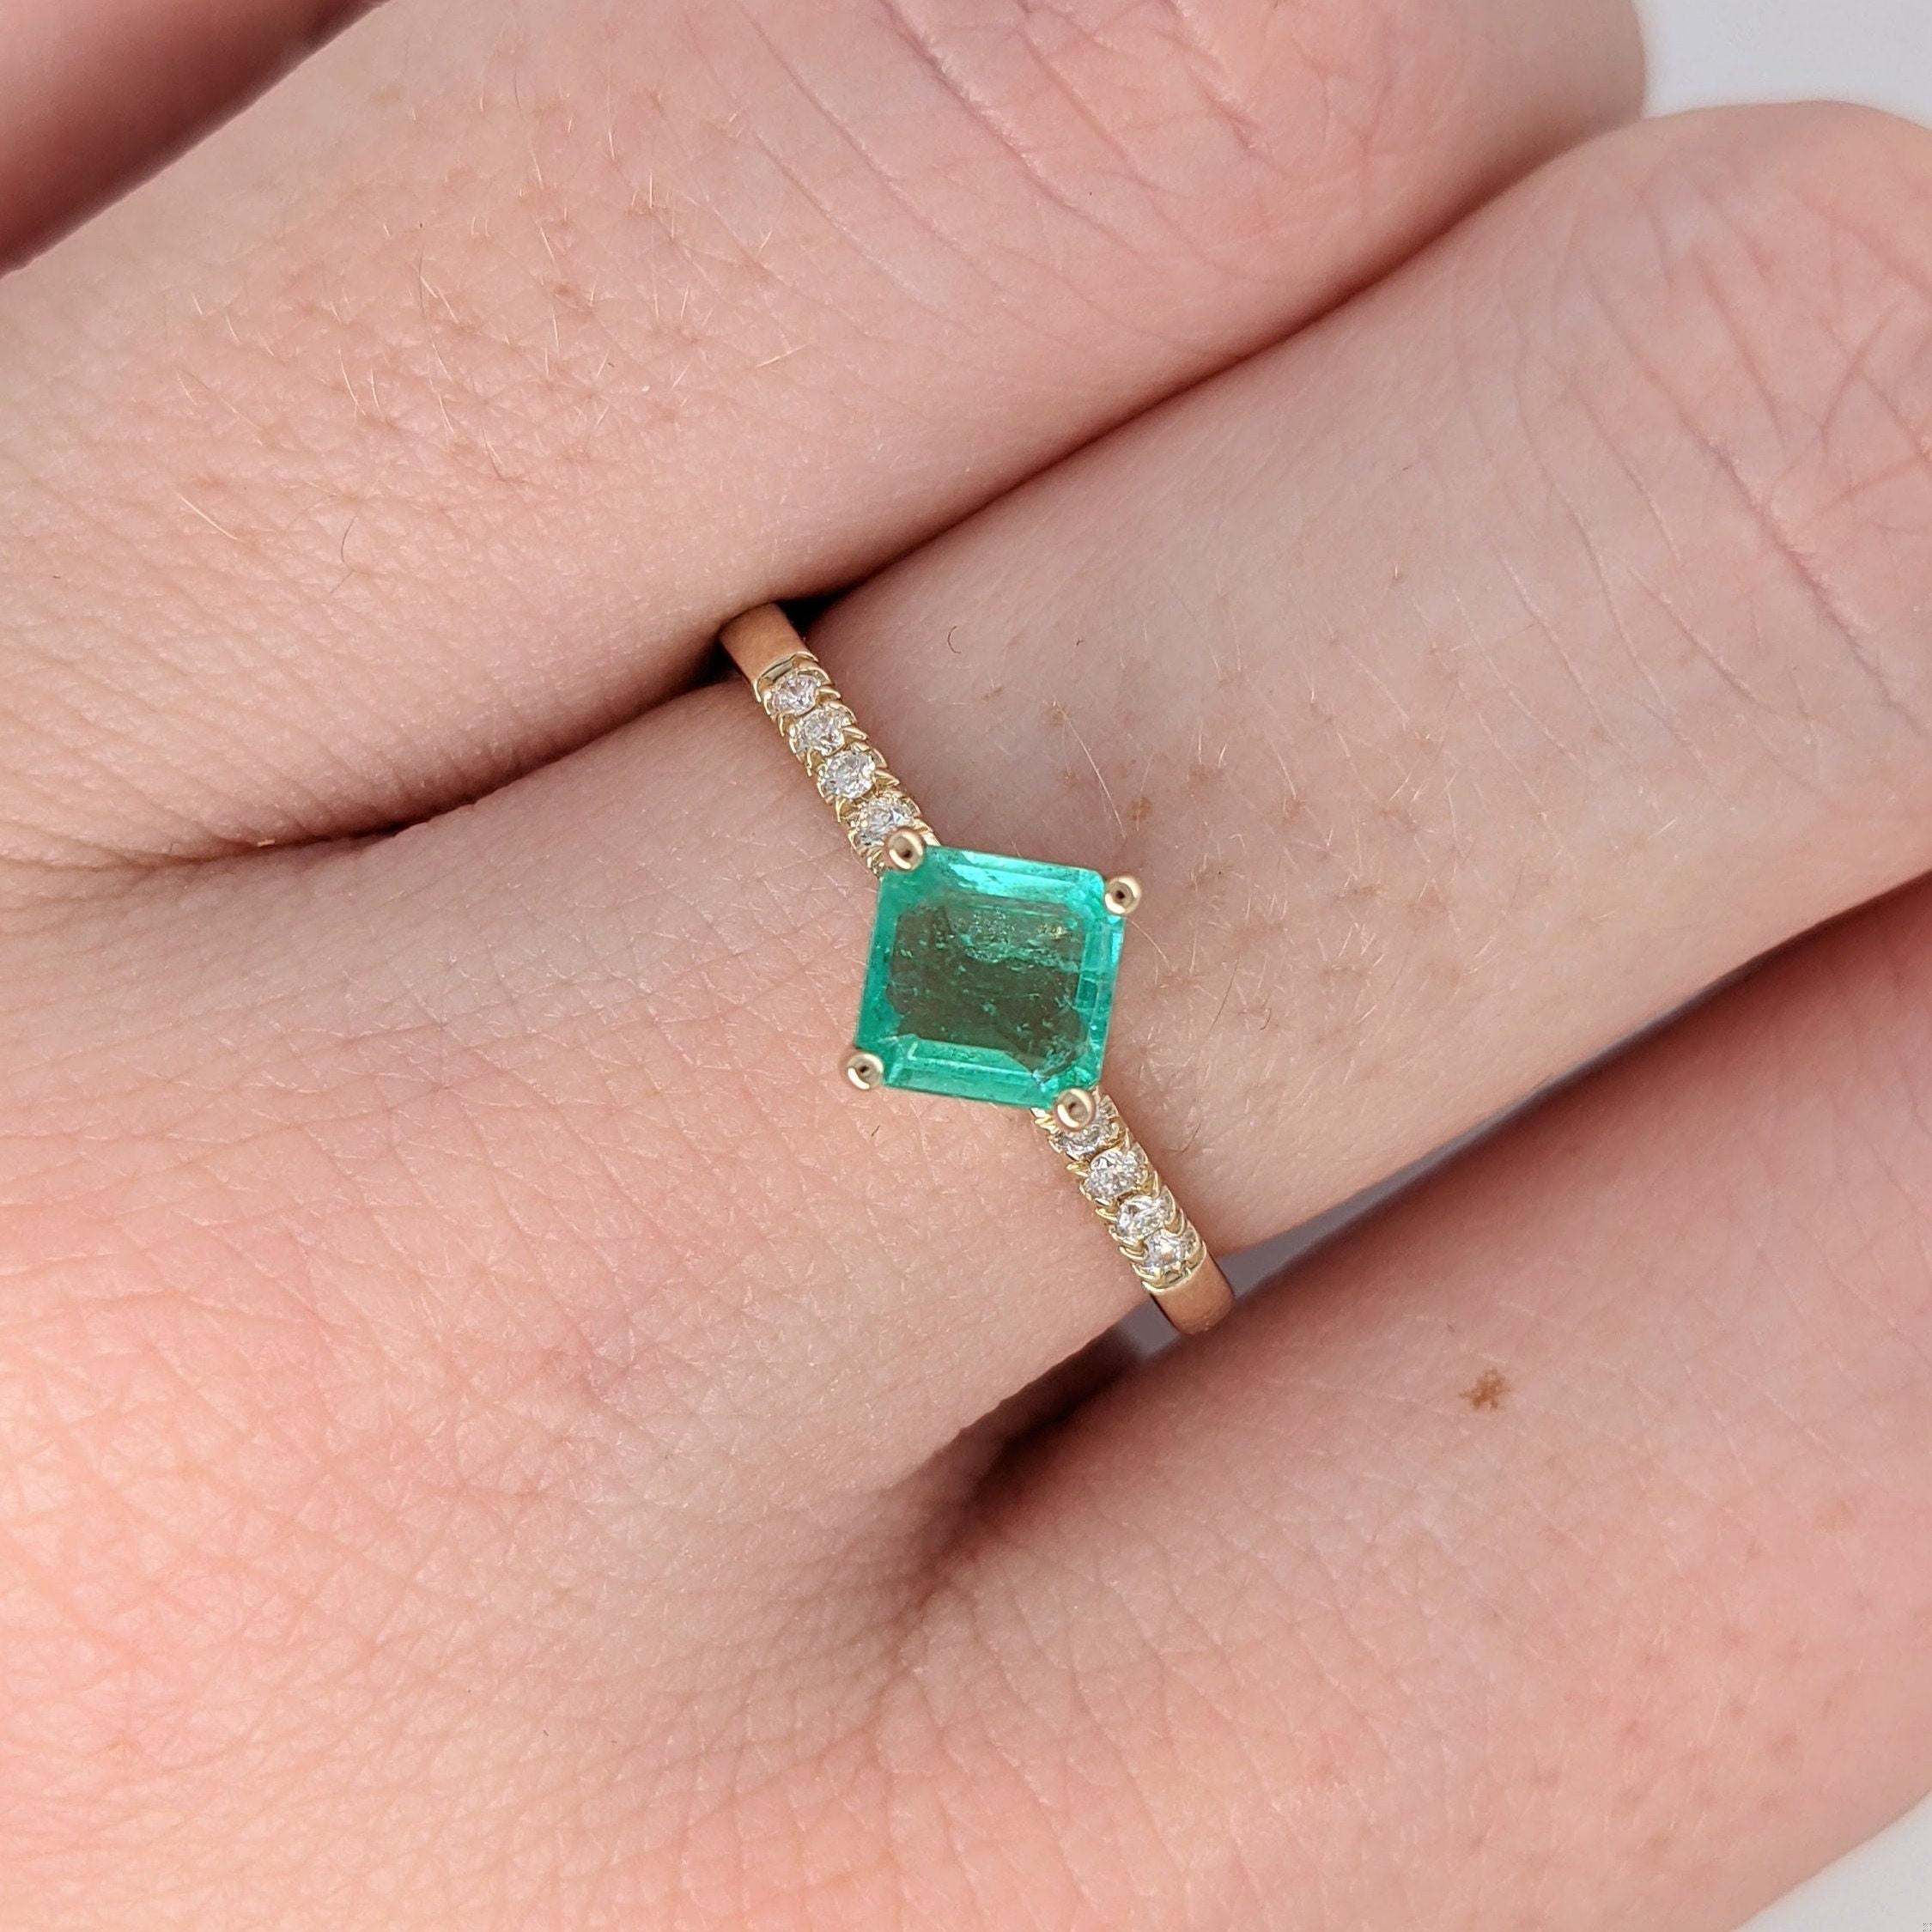 Glowing Green Emerald Ring w Earth Mined Diamonds in Solid 14K Gold Round 5mm